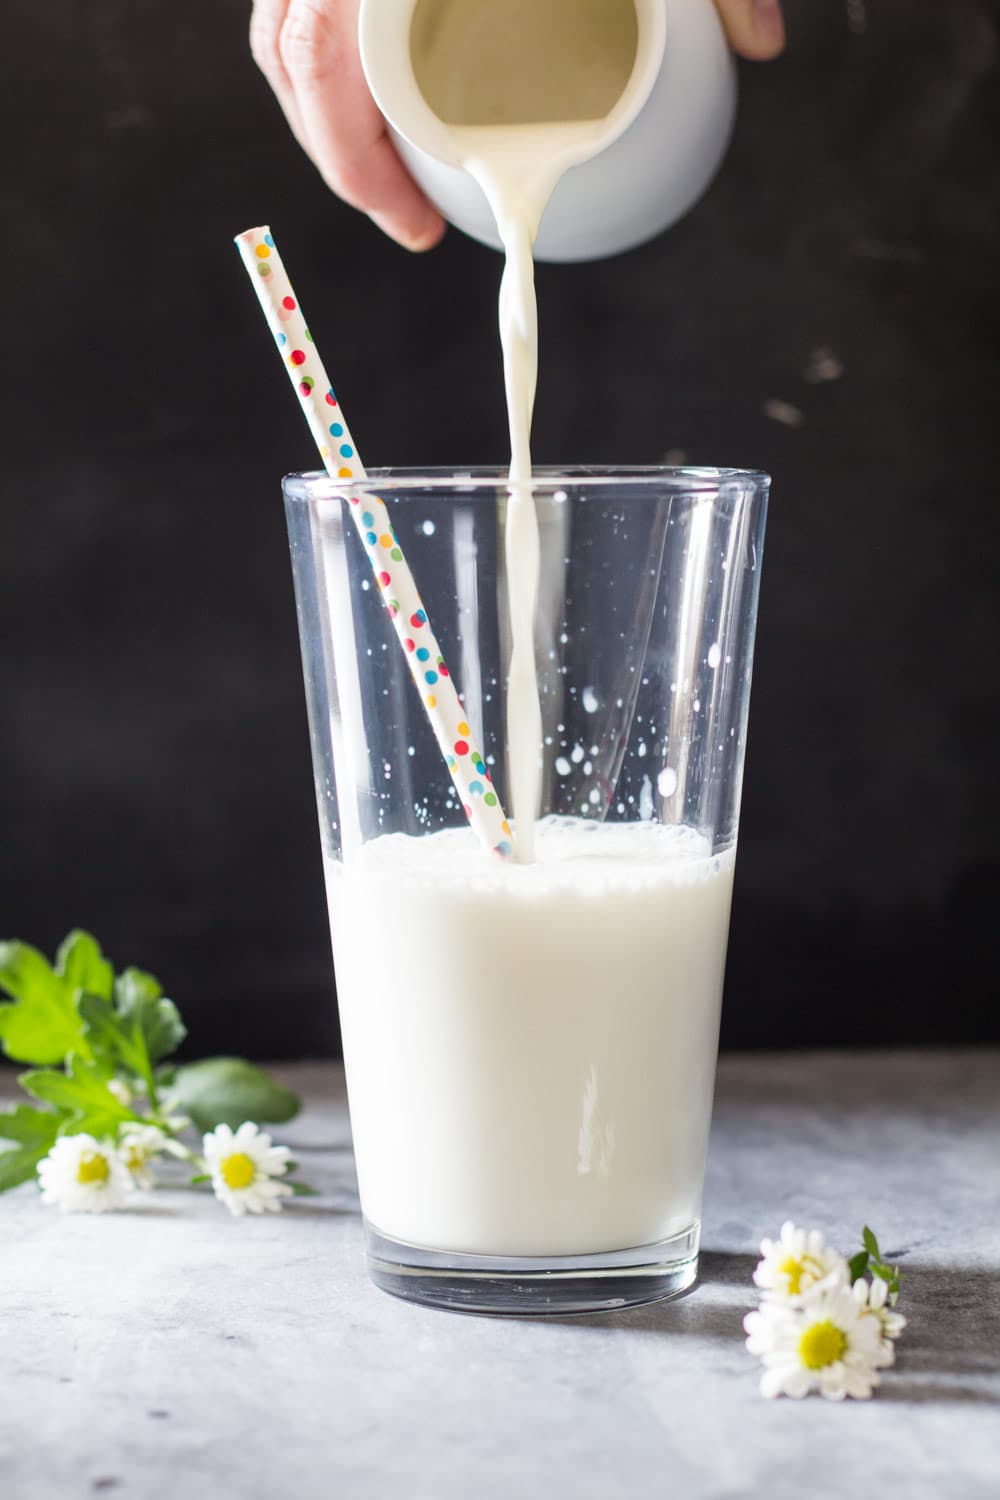 Milk being poured in a tall glass with a confetti straw from a white milk jar.